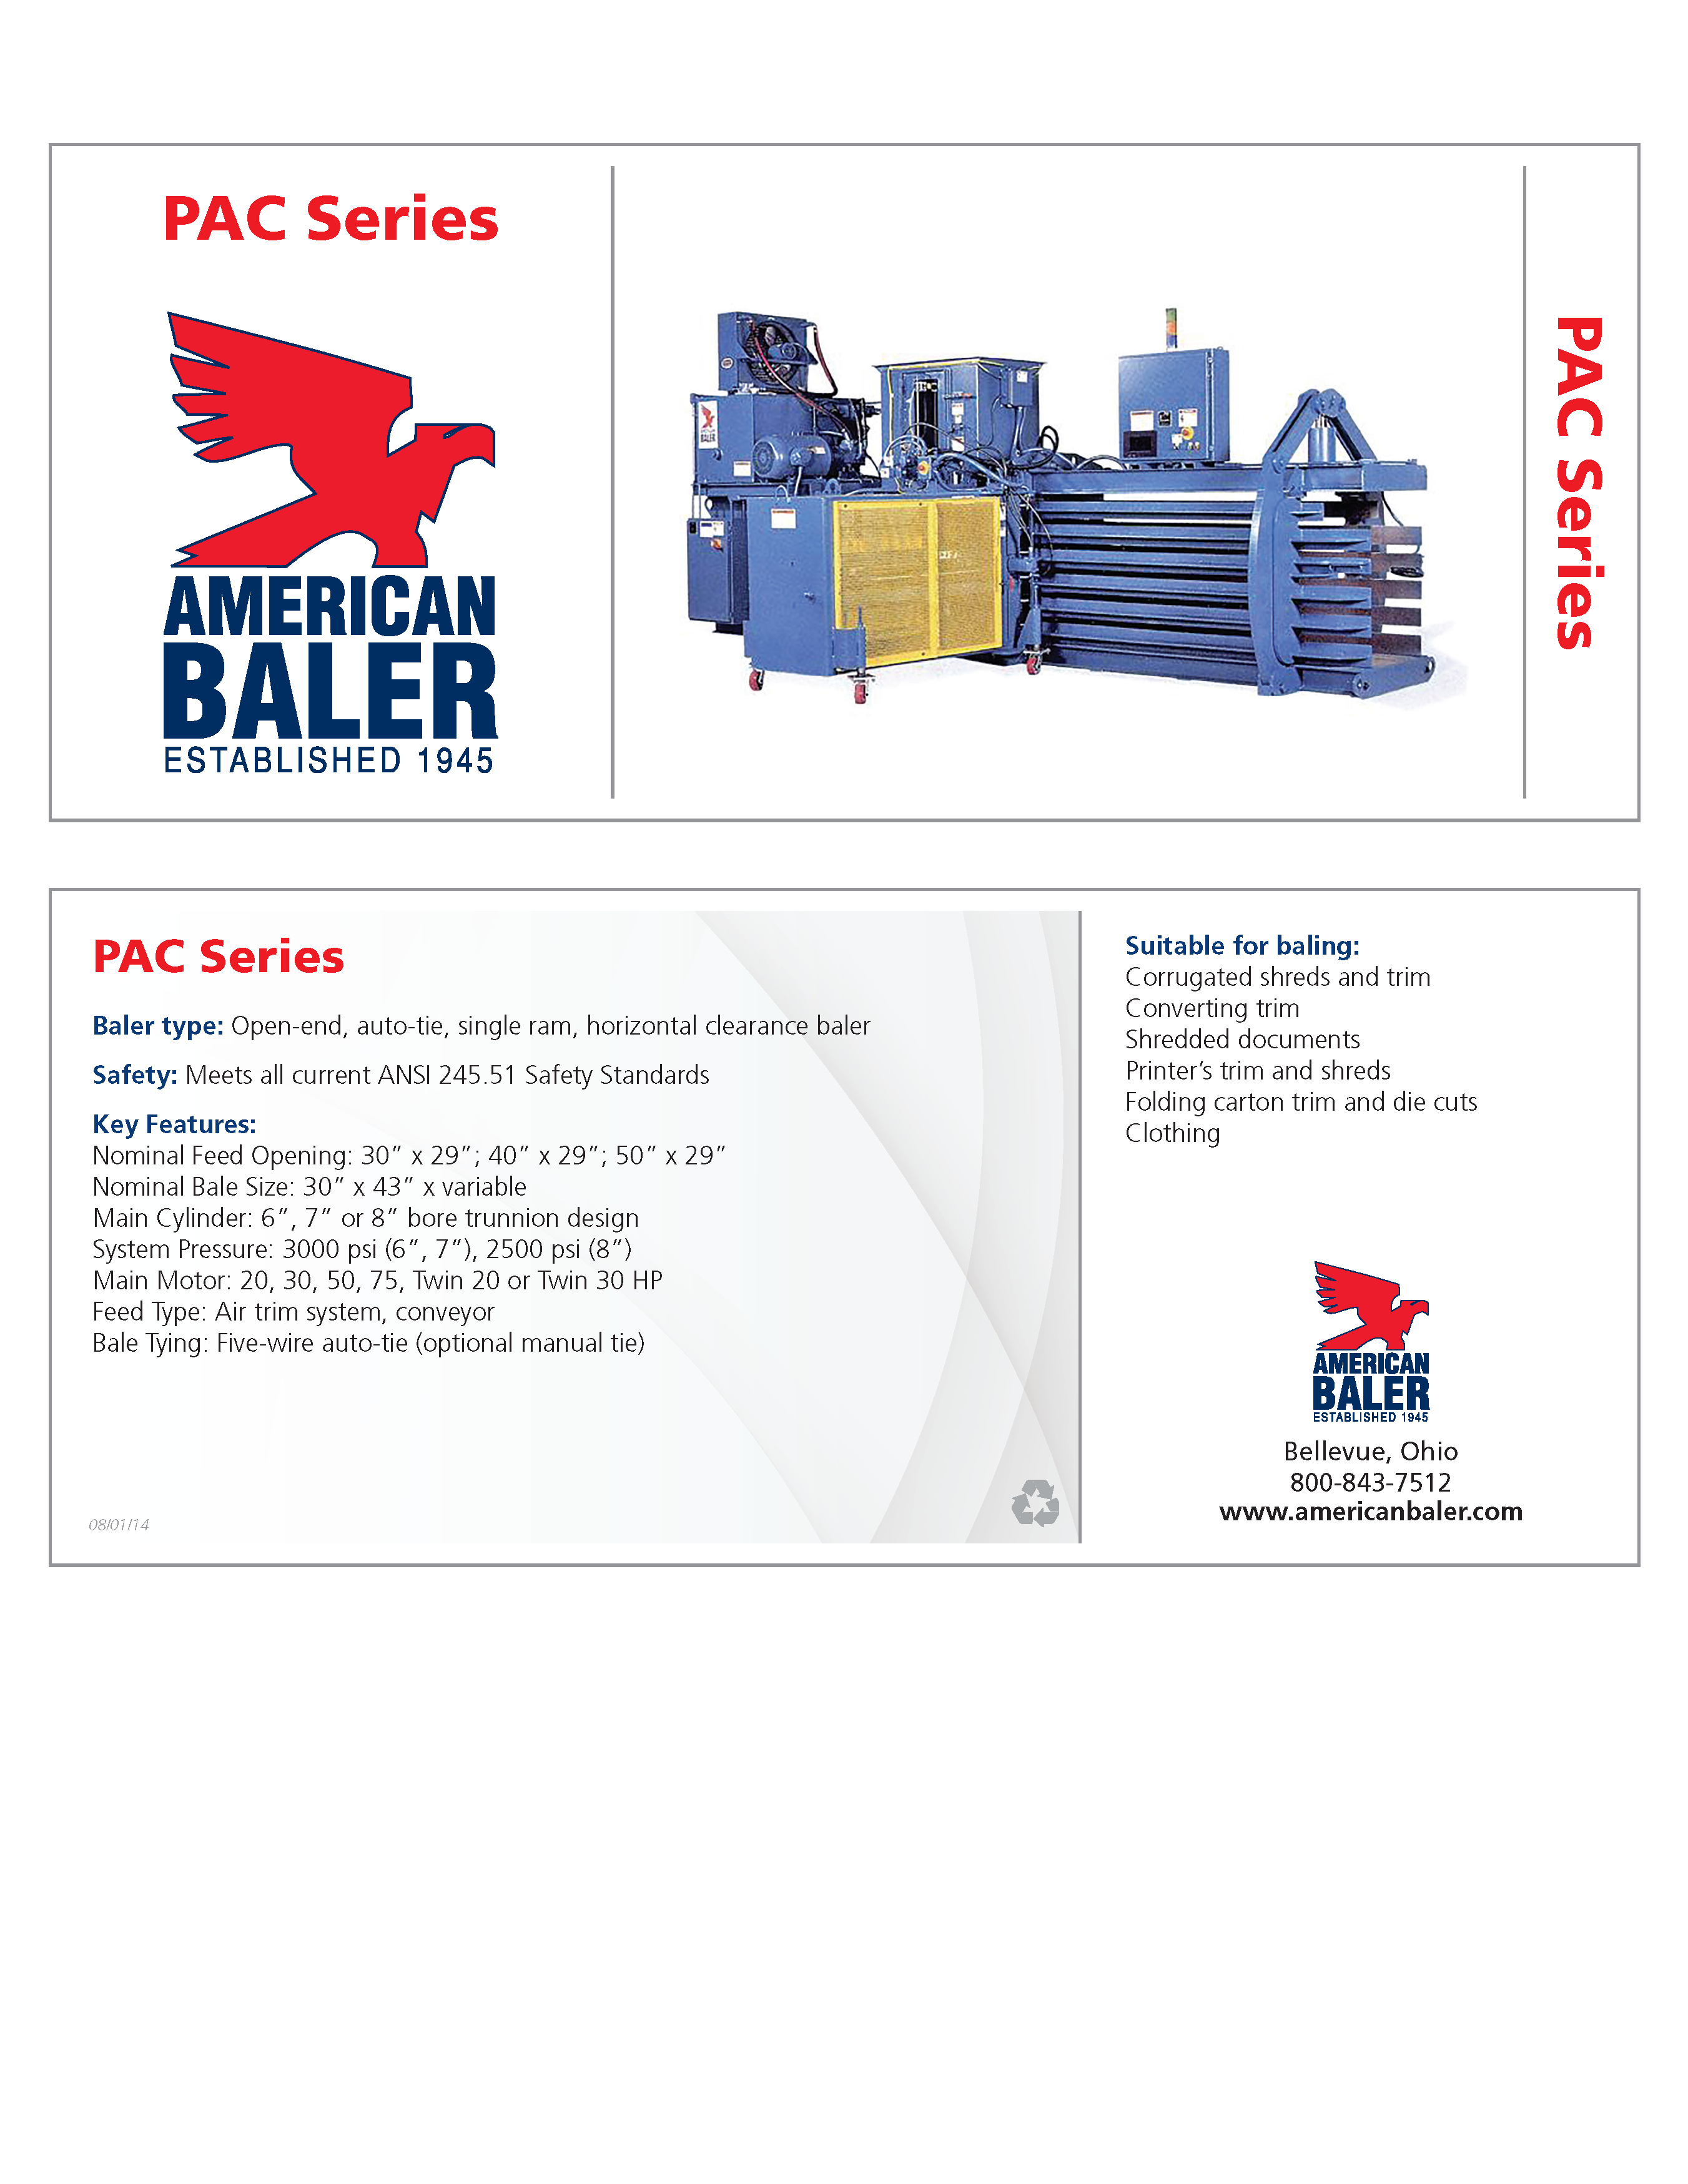 Learn more about the PAC Series Baler in the American Baler Brochure.